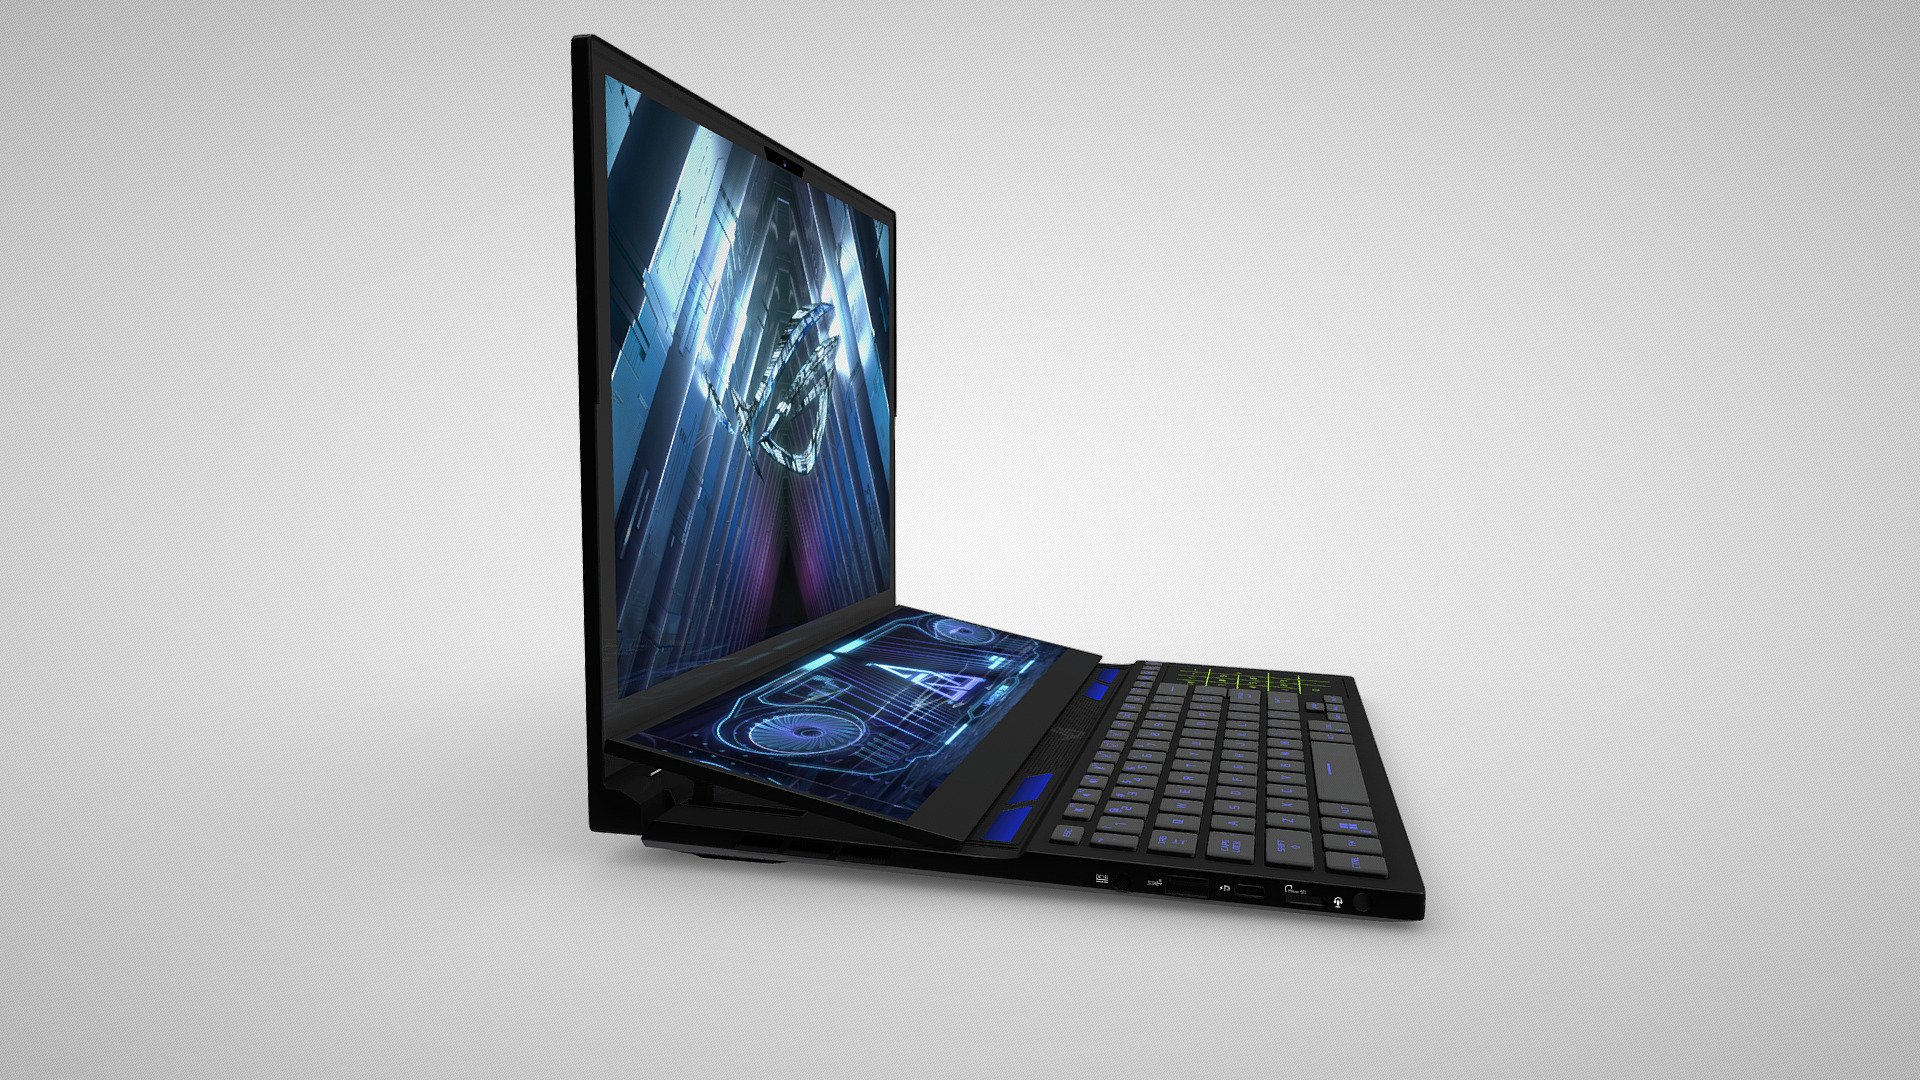 This high-fidelity 3D model meticulously represents the ROG Zephyrus Duo 16 GX650 (2023), an innovative gaming laptop that combines cutting-edge performance with a dual-screen design. The model accurately captures the physical details, including the sleek metallic chassis, customizable RGB lighting, dual displays, and the distinctive ROG logo.

The primary display is vivid and showcases the laptop's gaming capabilities, while the secondary ScreenPad Plus adds an extra dimension of productivity and multitasking. The keyboard, designed for gaming comfort, is backlit with customizable RGB lighting, providing an immersive gaming experience.

The model includes accurately rendered ports, ventilation, and other intricate design elements that make the ROG Zephyrus Duo 16 GX650 a standout in the gaming laptop market.

This 3D model is optimized for realistic rendering and visualization purposes, with clean geometry, proper materials, and realistic texturing 3d model